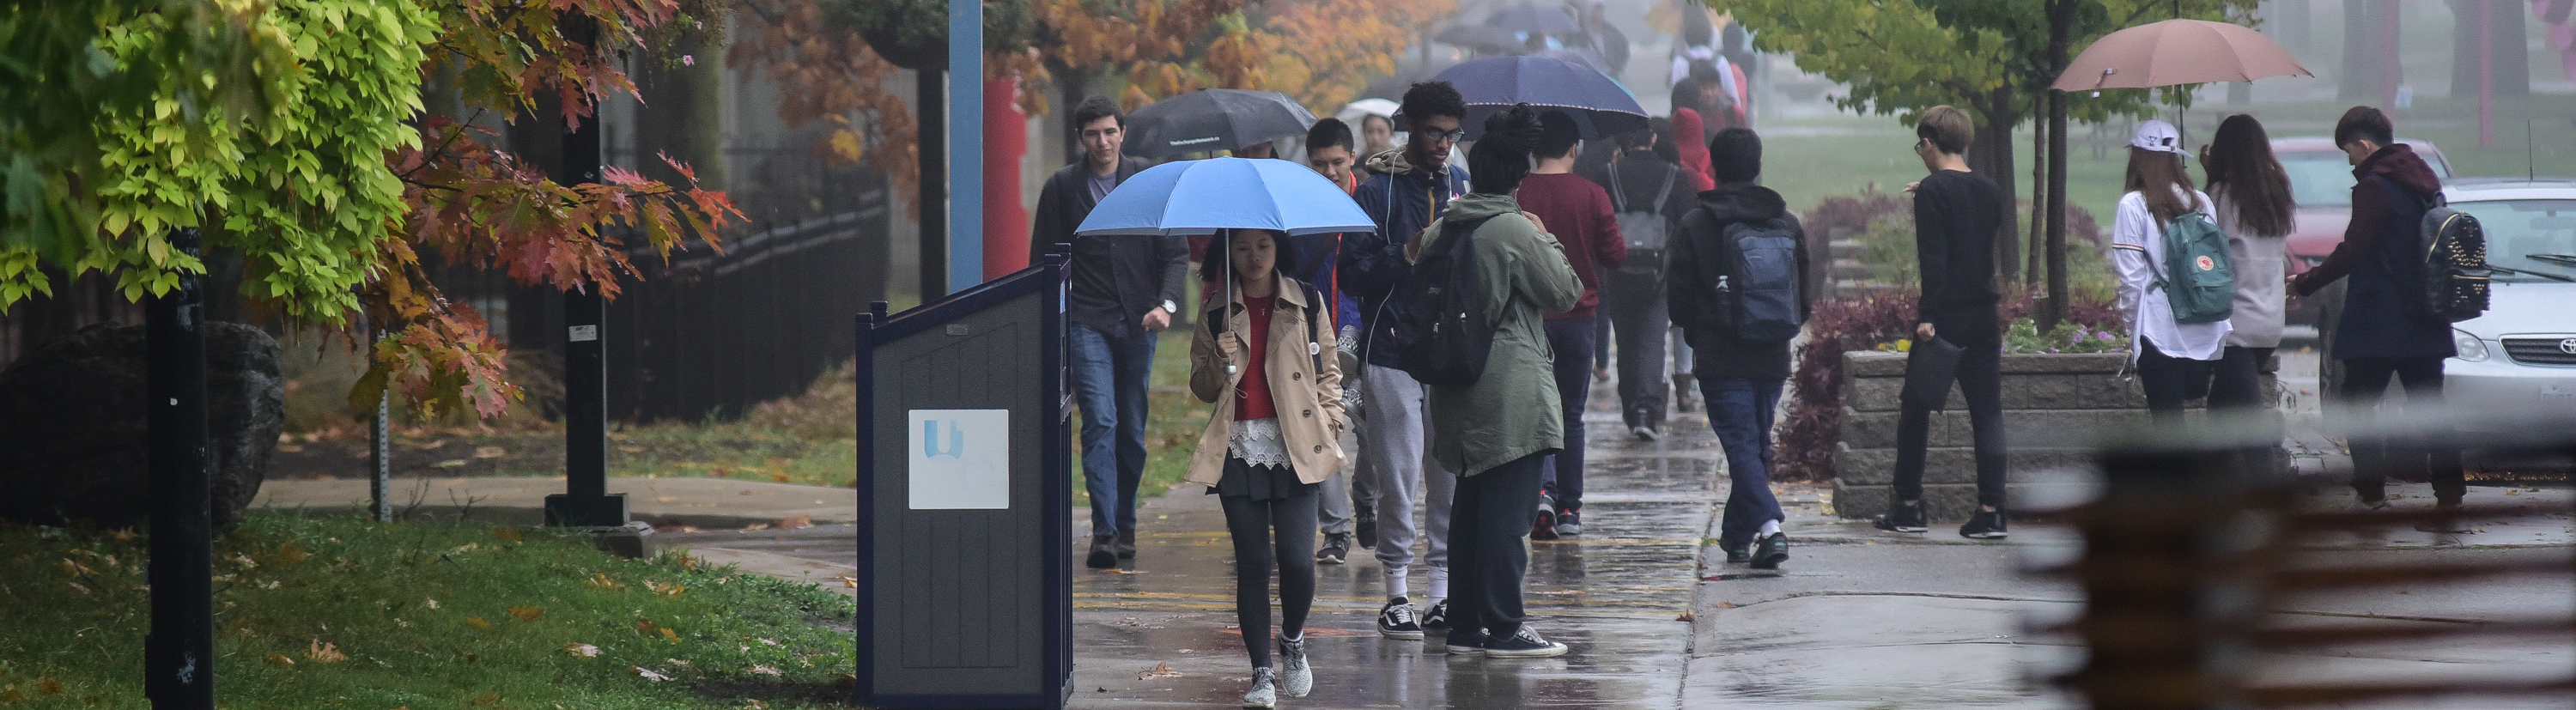 Students walking at UTSC in the rain